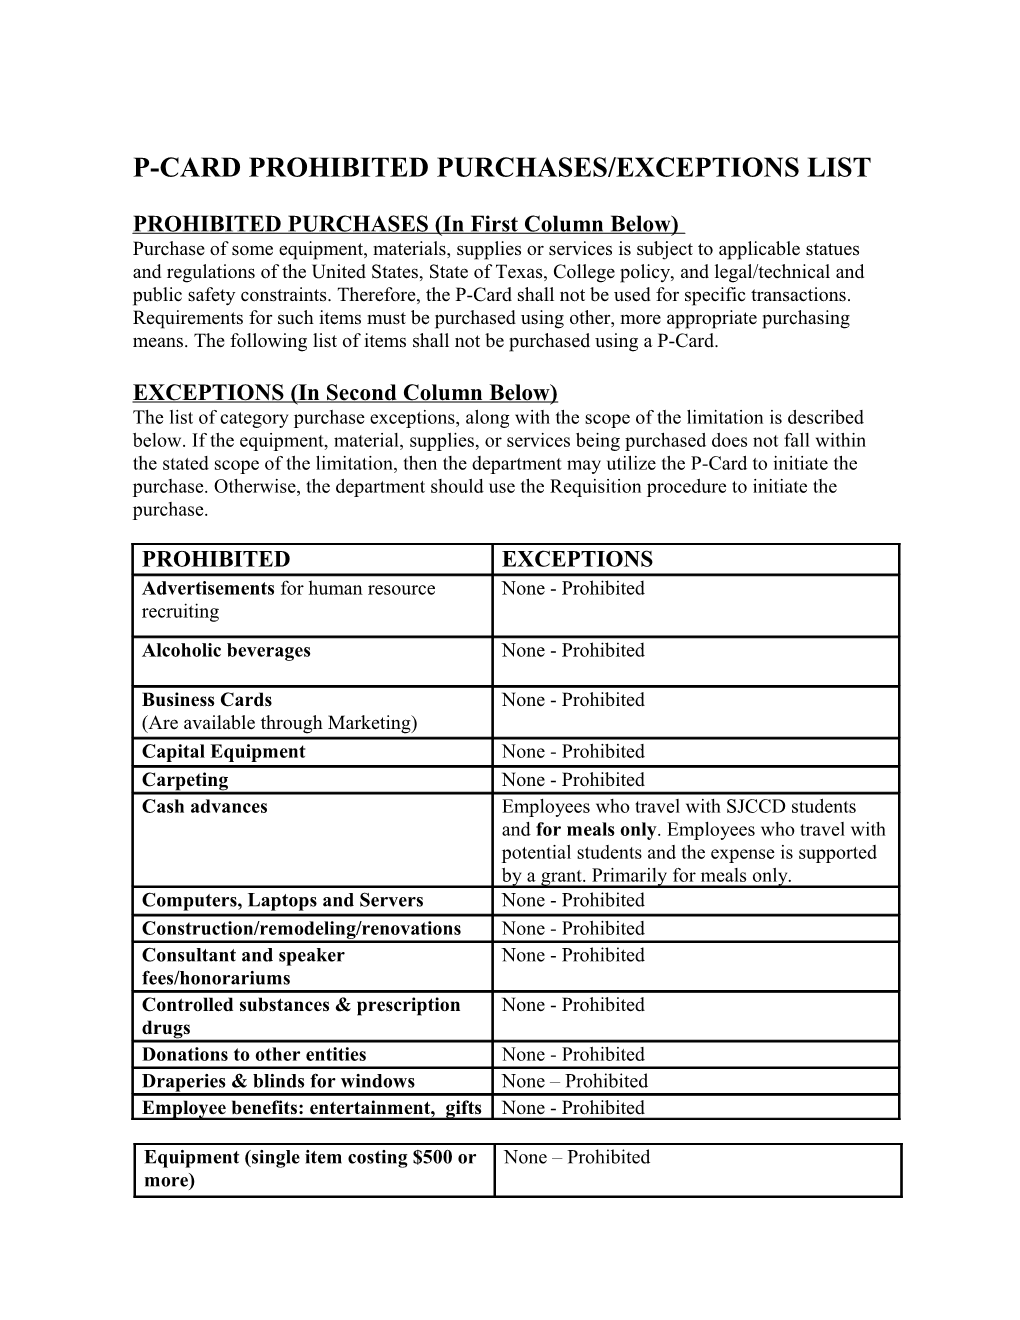 P-Card Prohibited Purchases/Exceptions List